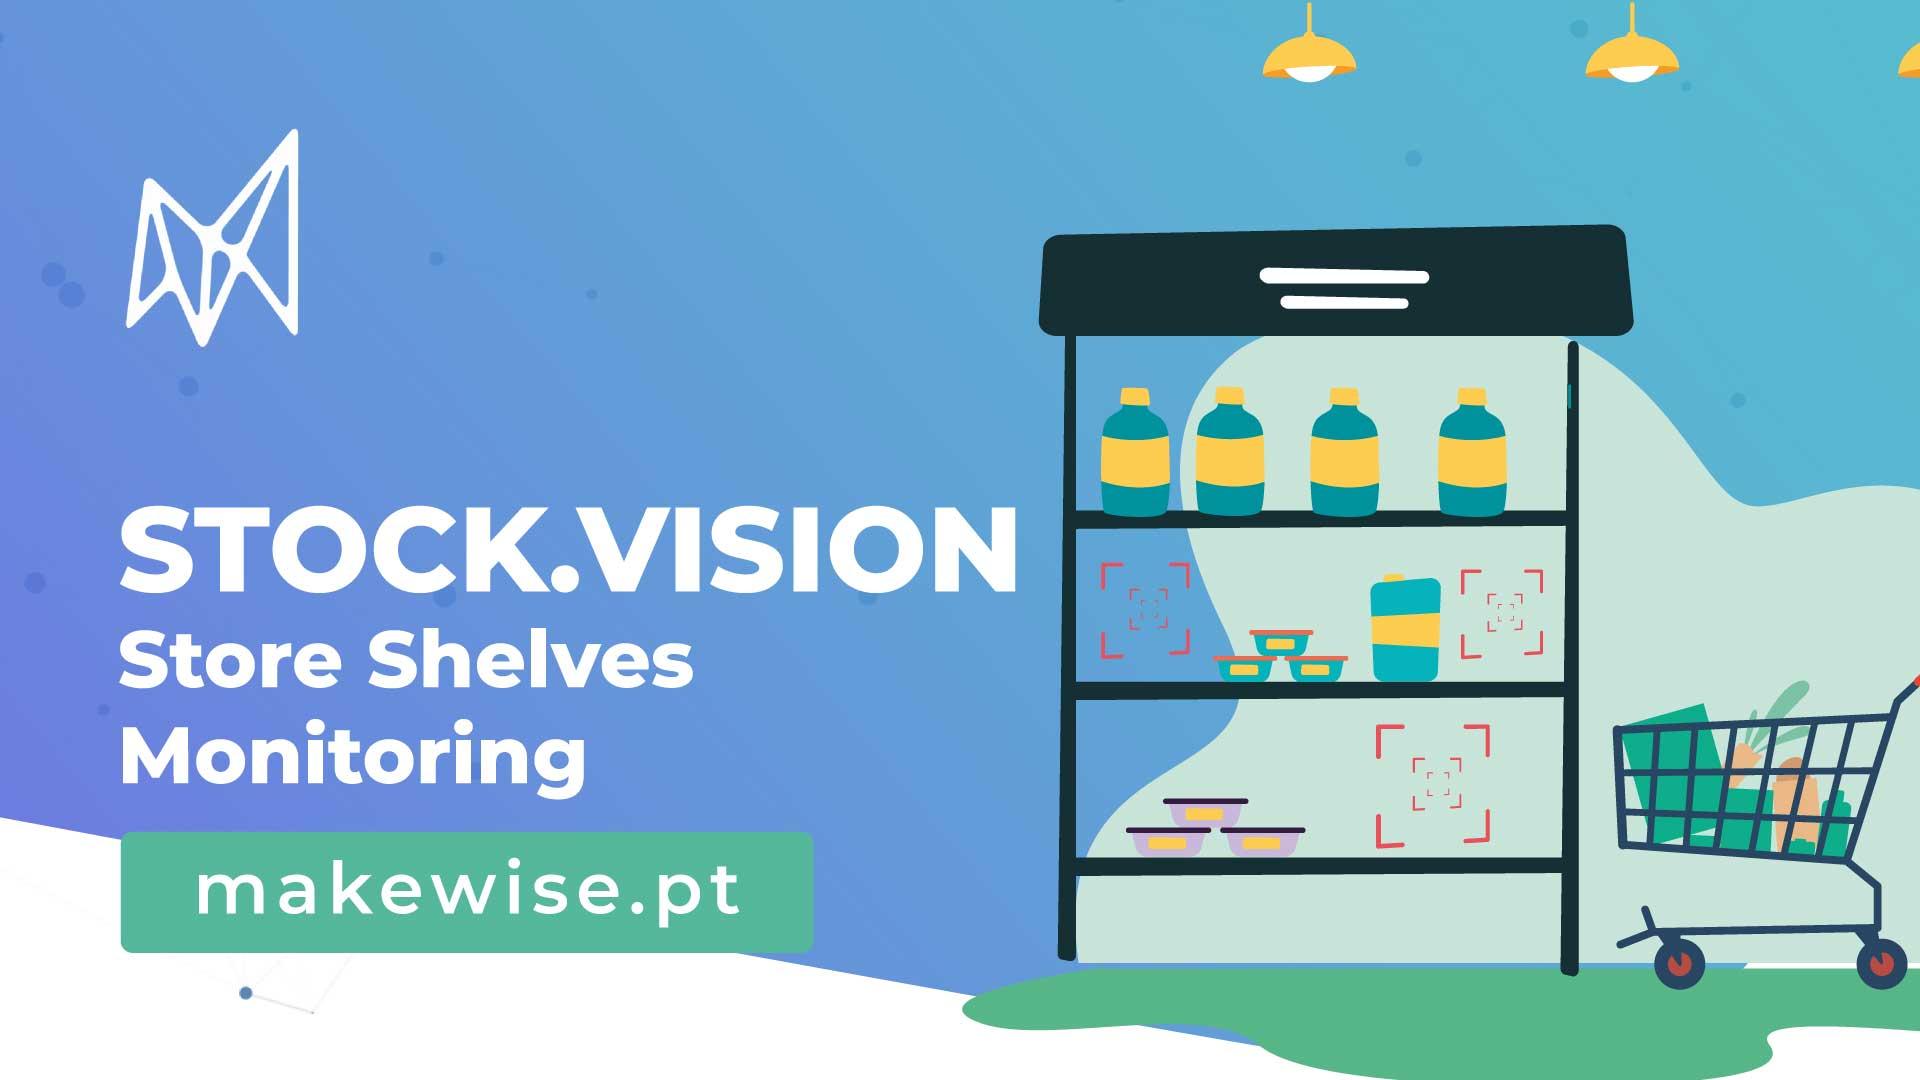 STOCK.VISION - Store Shelves Monitoring - MakeWise